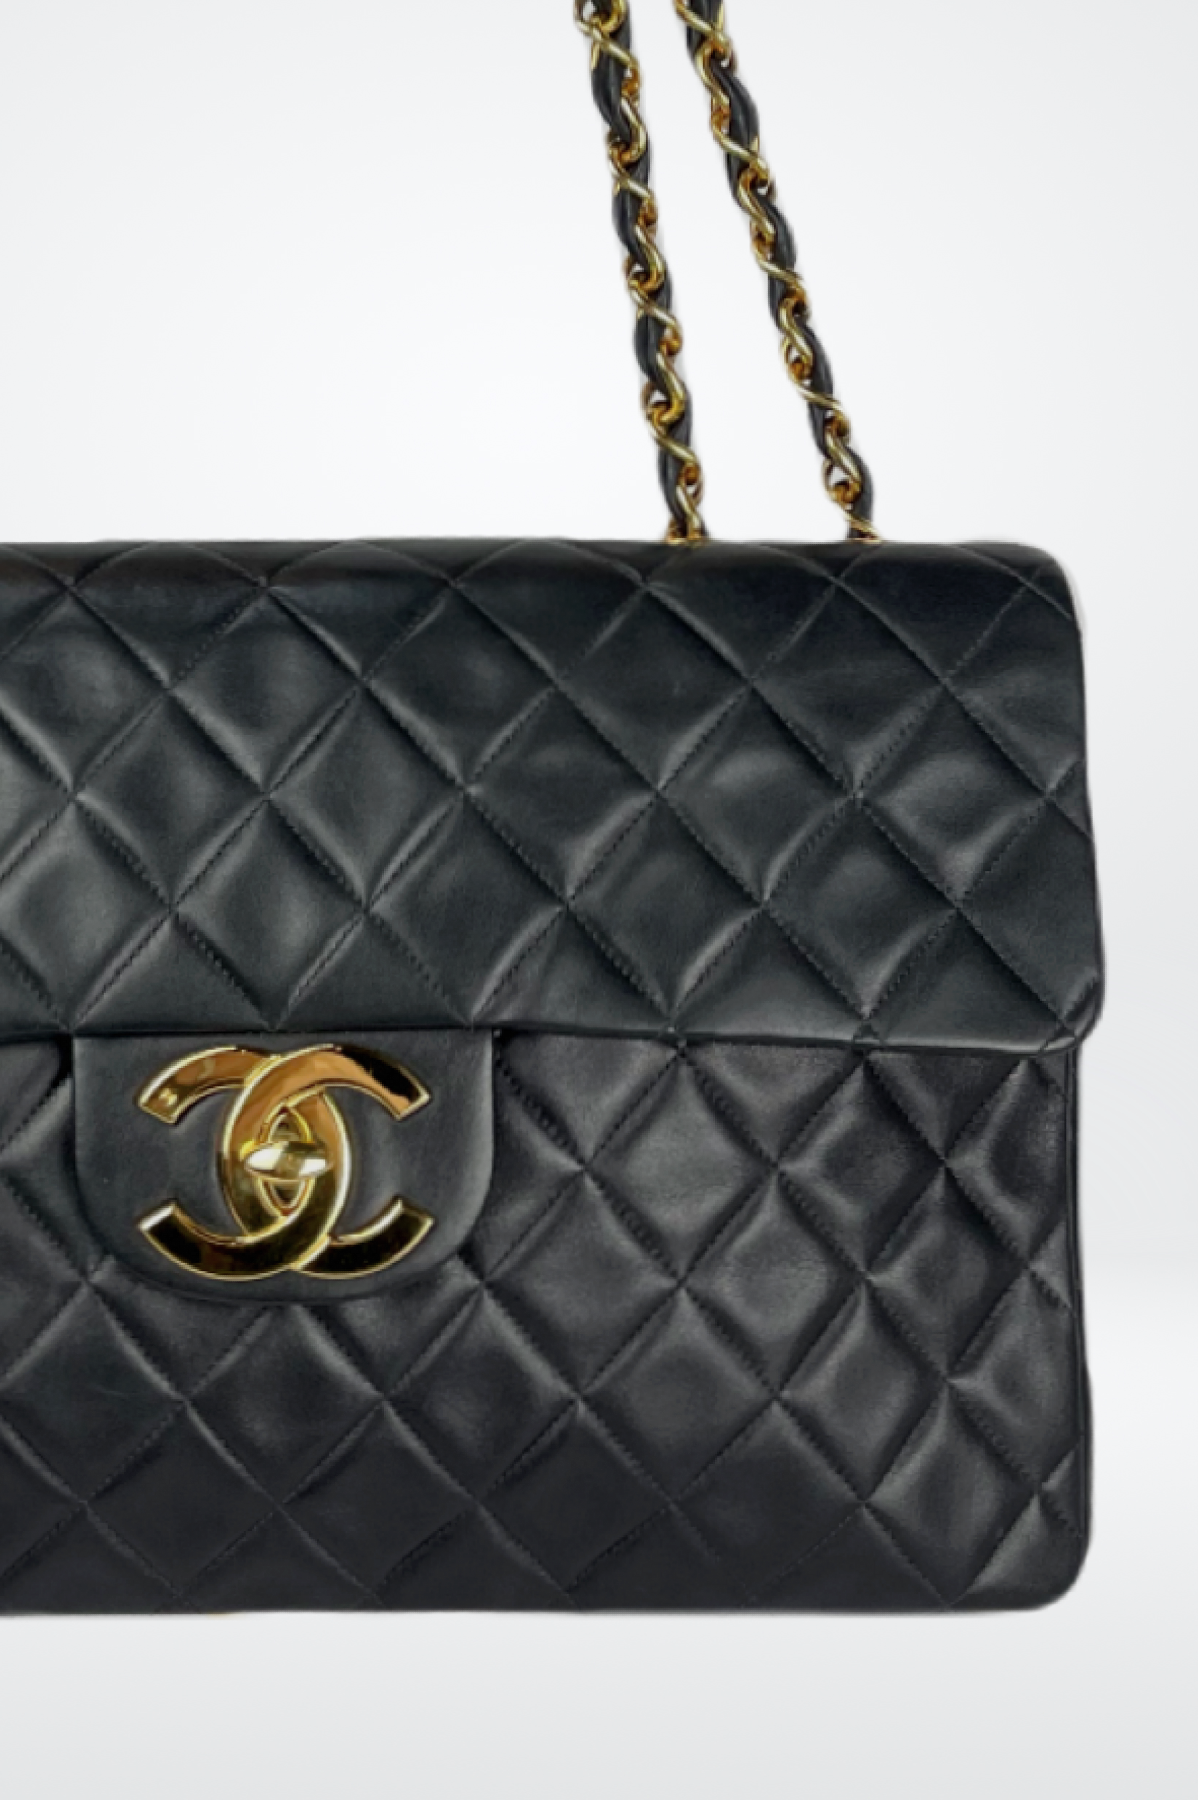 Chanel "Maxi Classic Double Flap Bag" Black w Gold Hardware